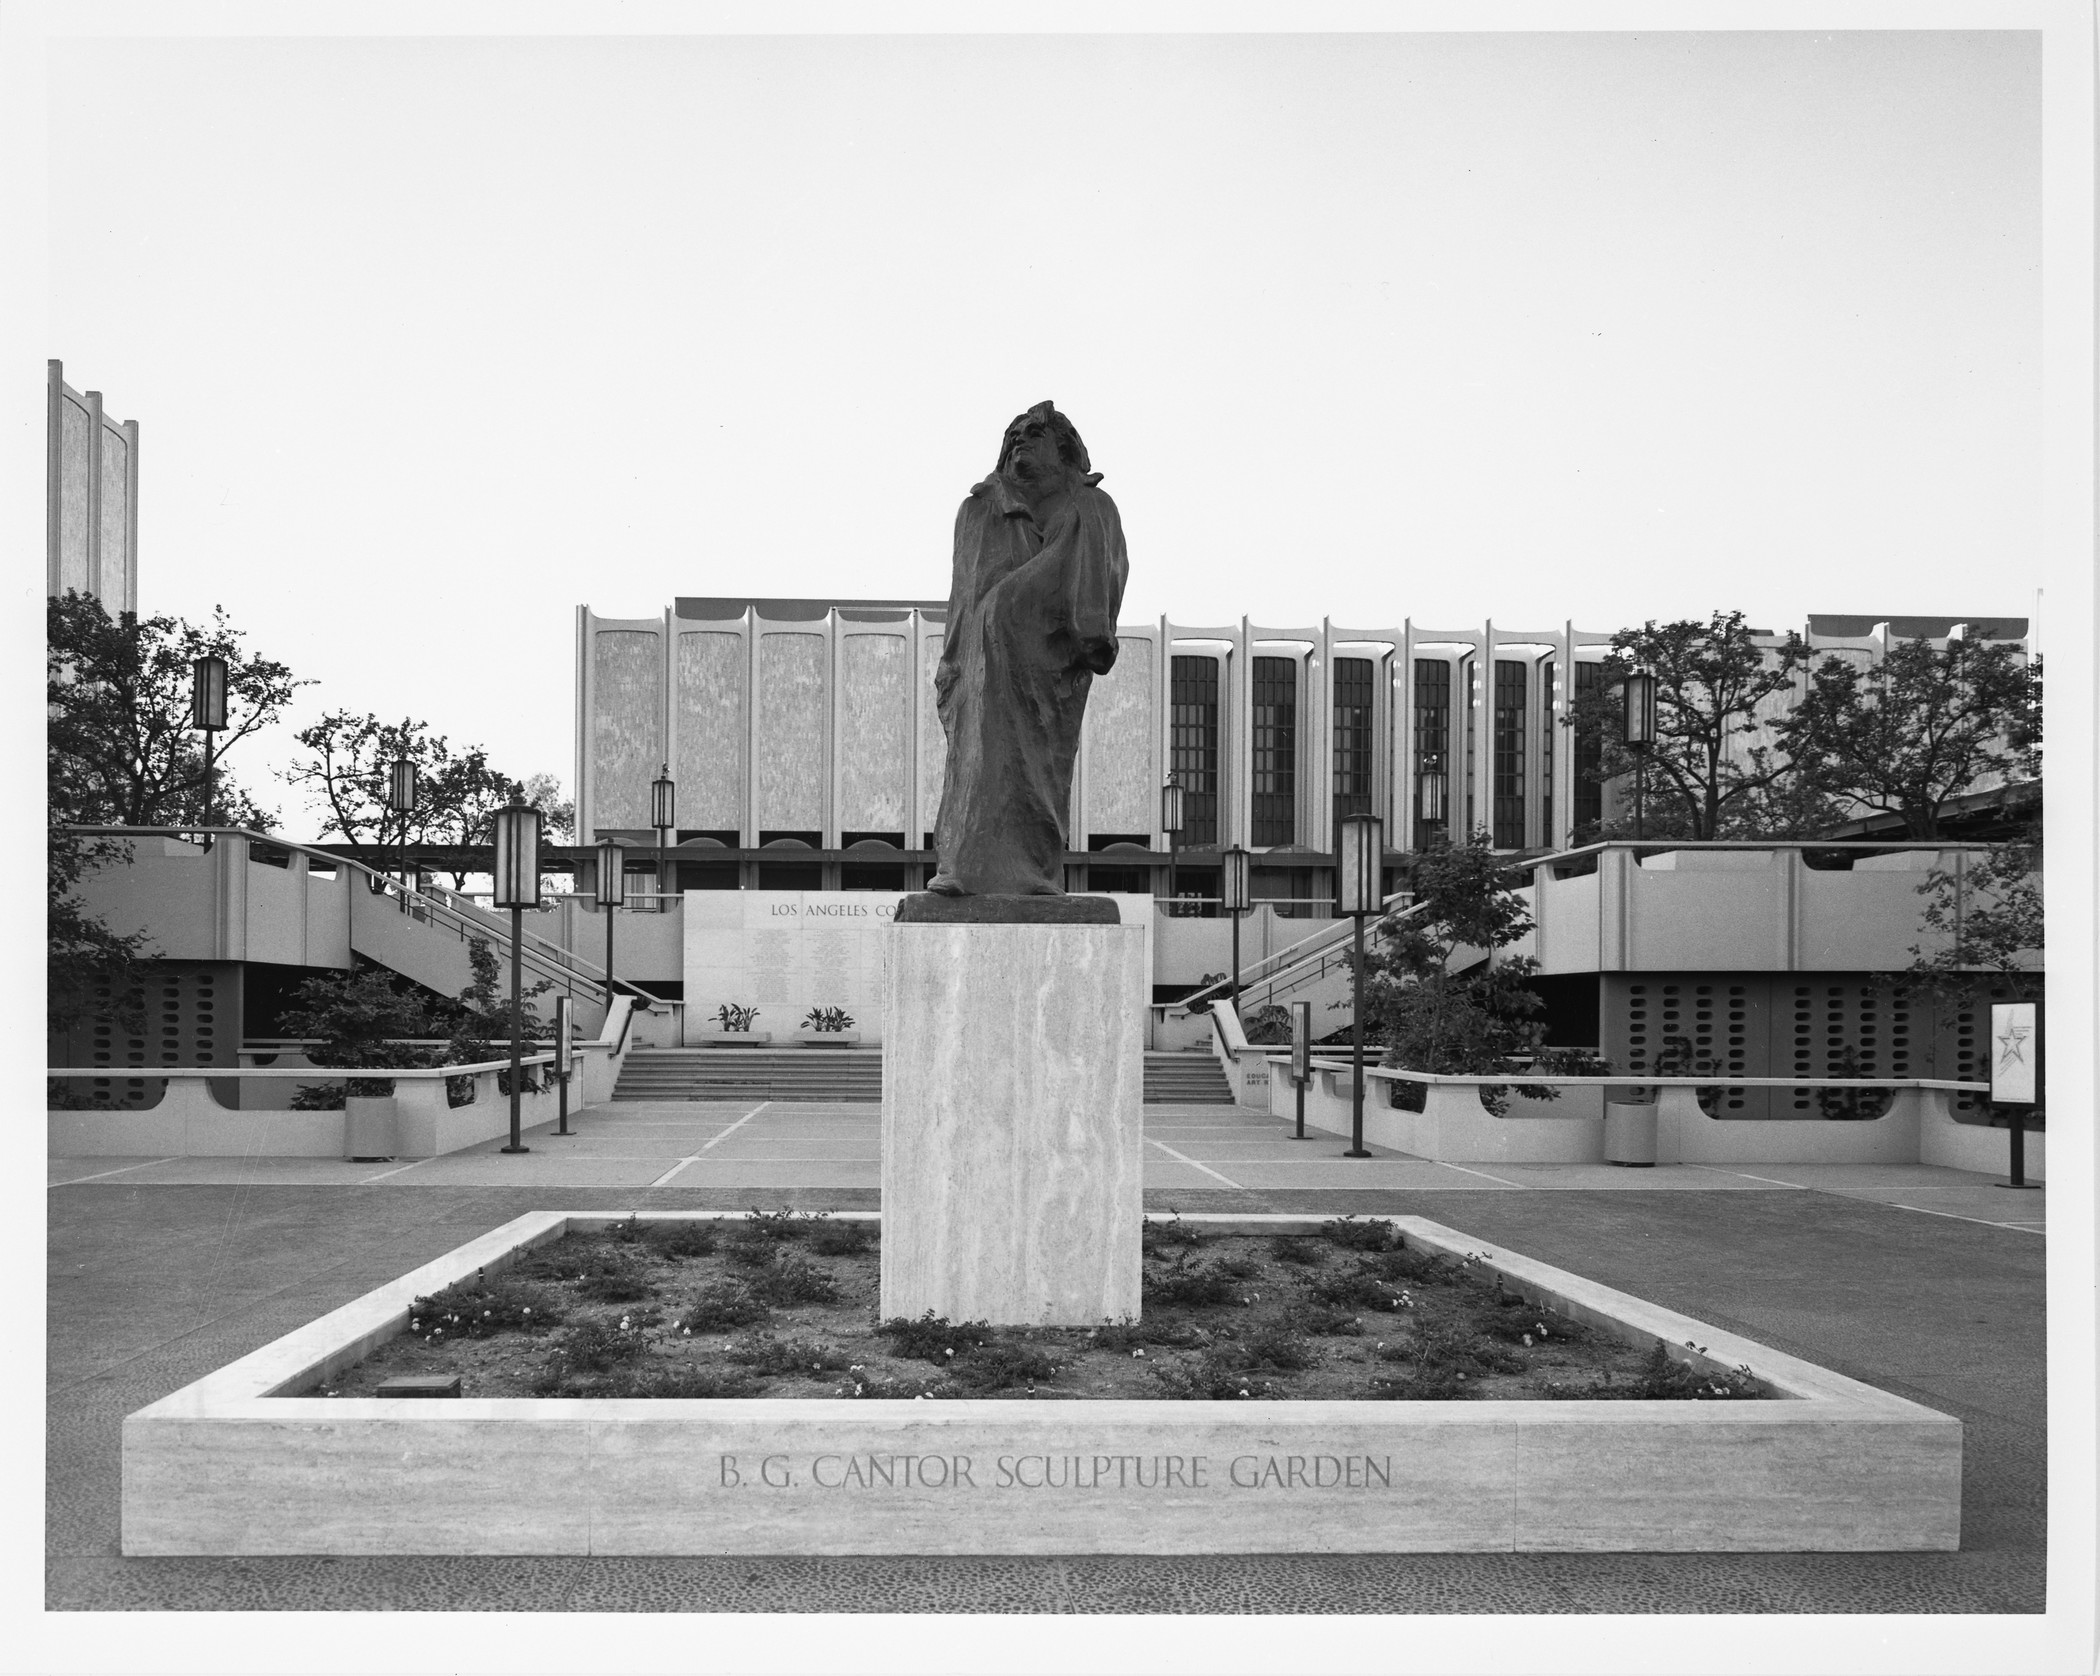 B. Gerald Cantor Sculpture Garden, at the Los Angeles County Museum of Art, 1974, photo © Museum Associates/LACMA